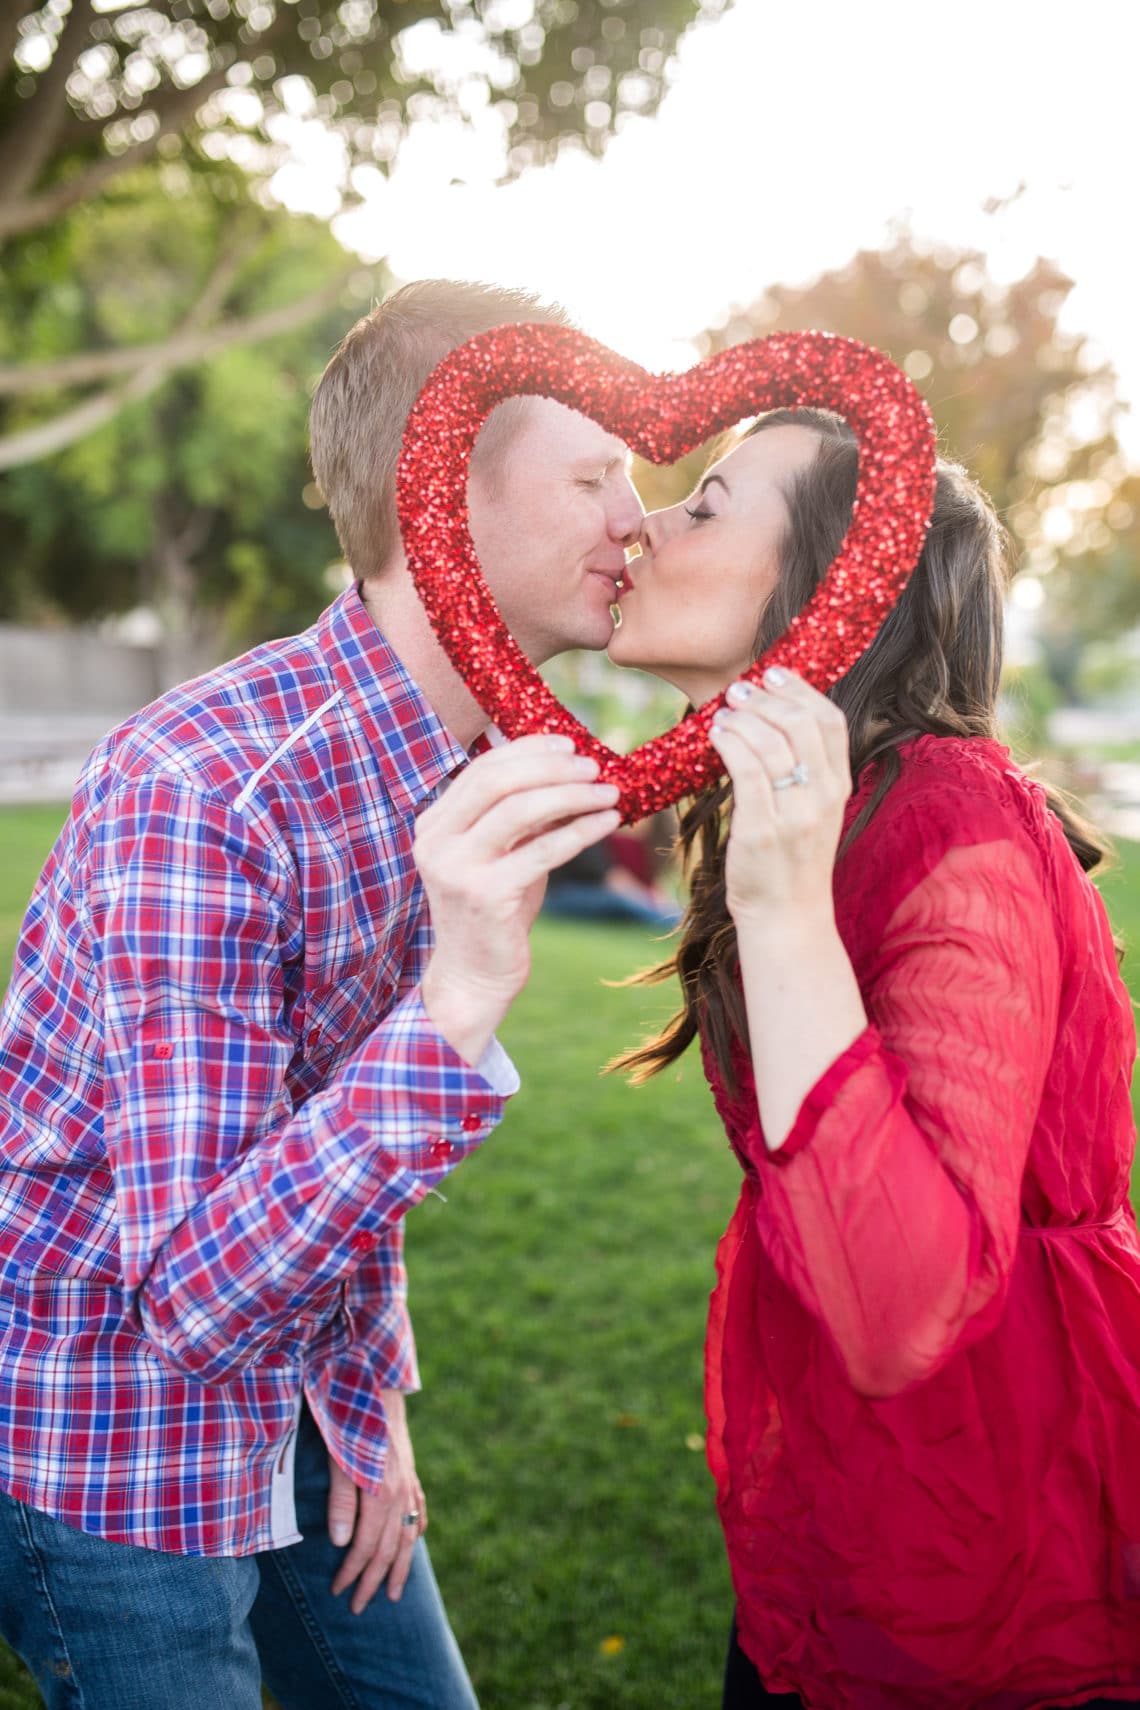 Valentine's Day Date Ideas for Every Budget